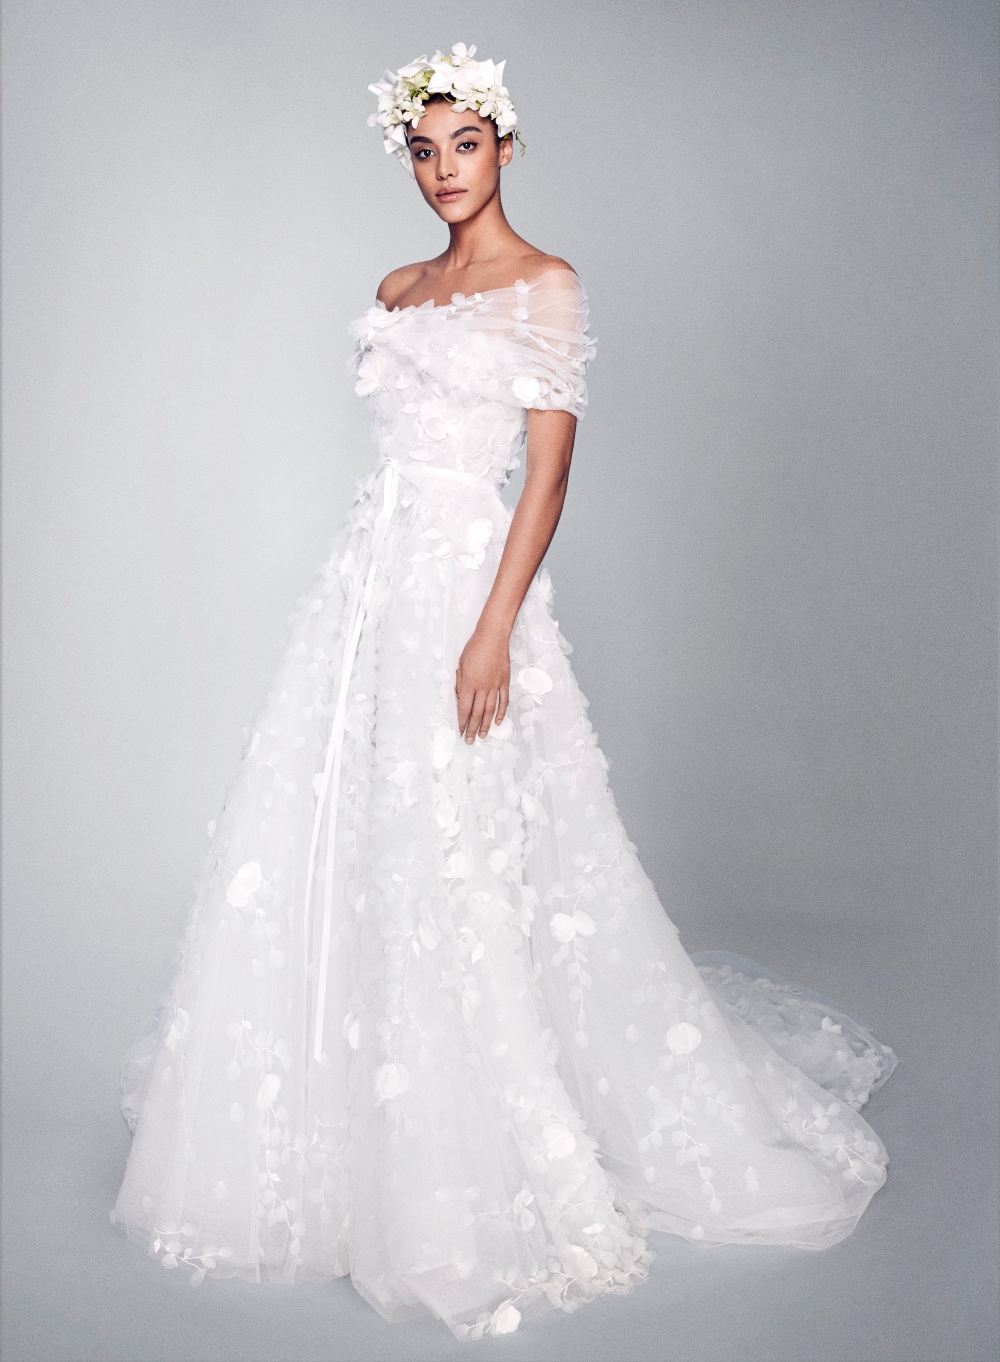 Check out This New Marchesa Wedding Dress